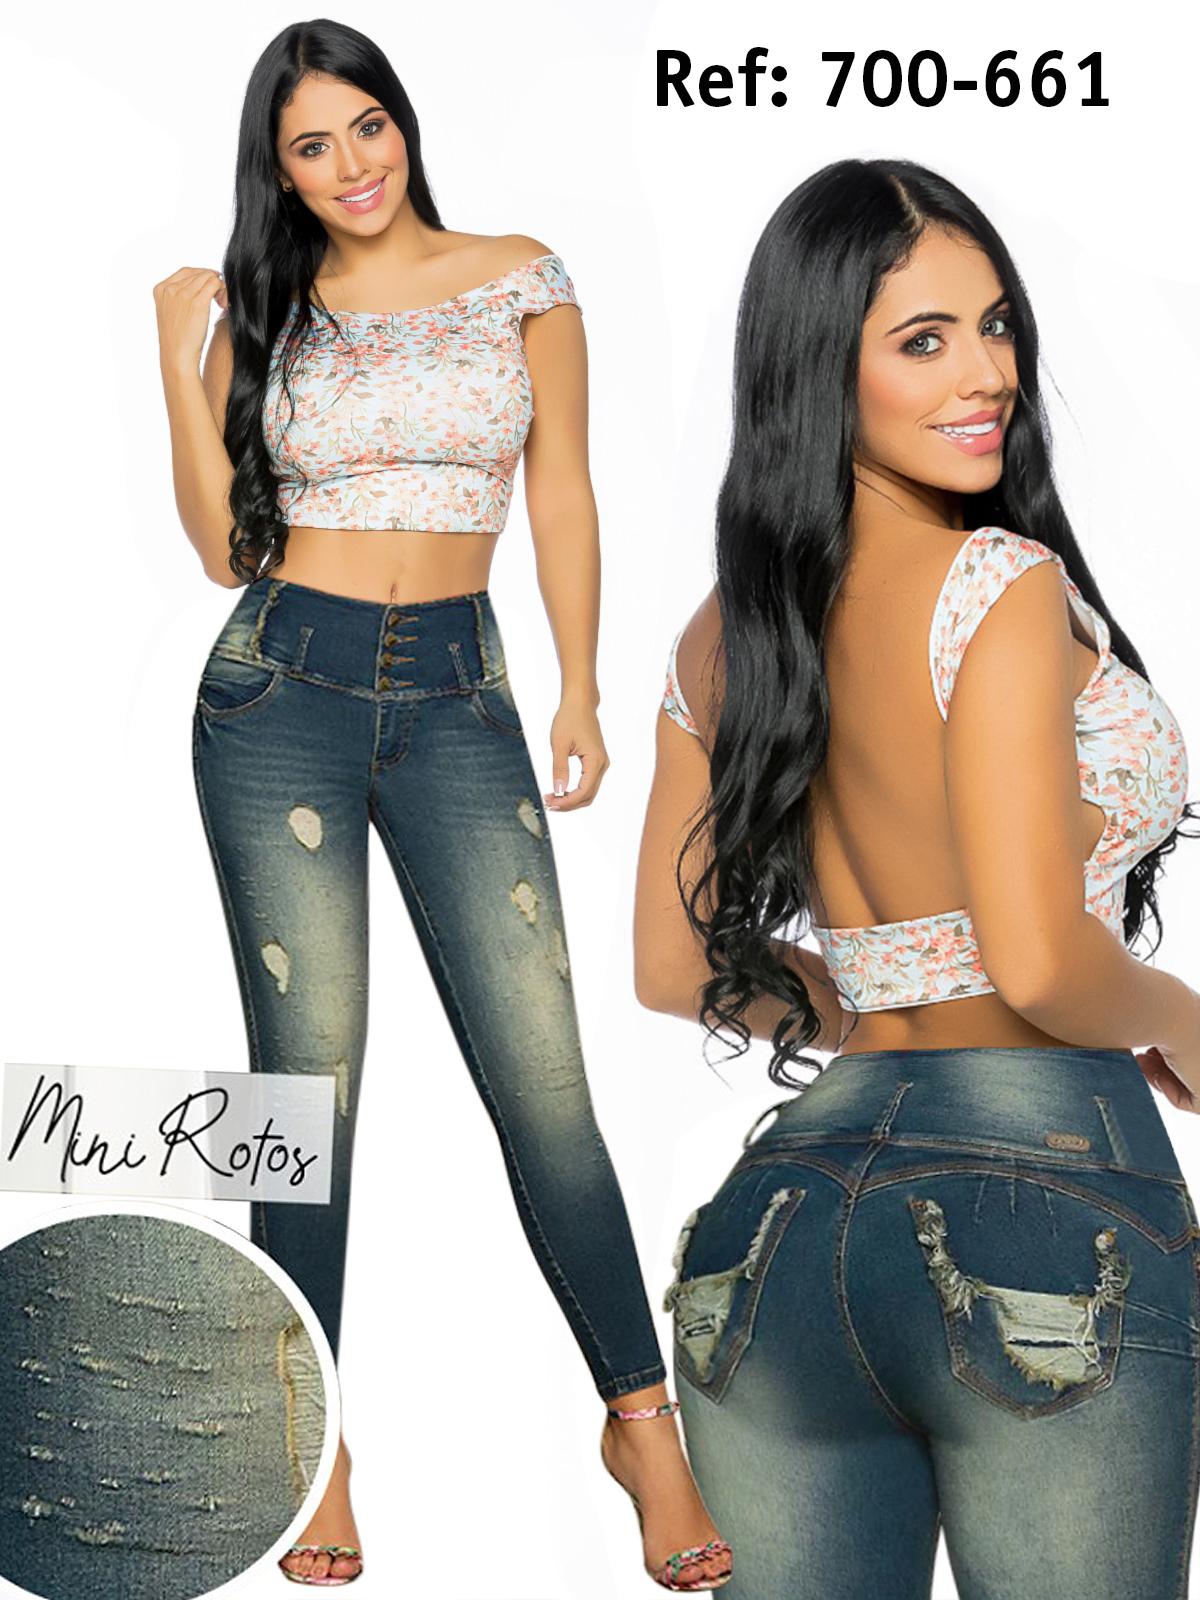 Colombian Jean  Fake Pockets, Double Tail and High Waistband with four buttons to control the abdomen.